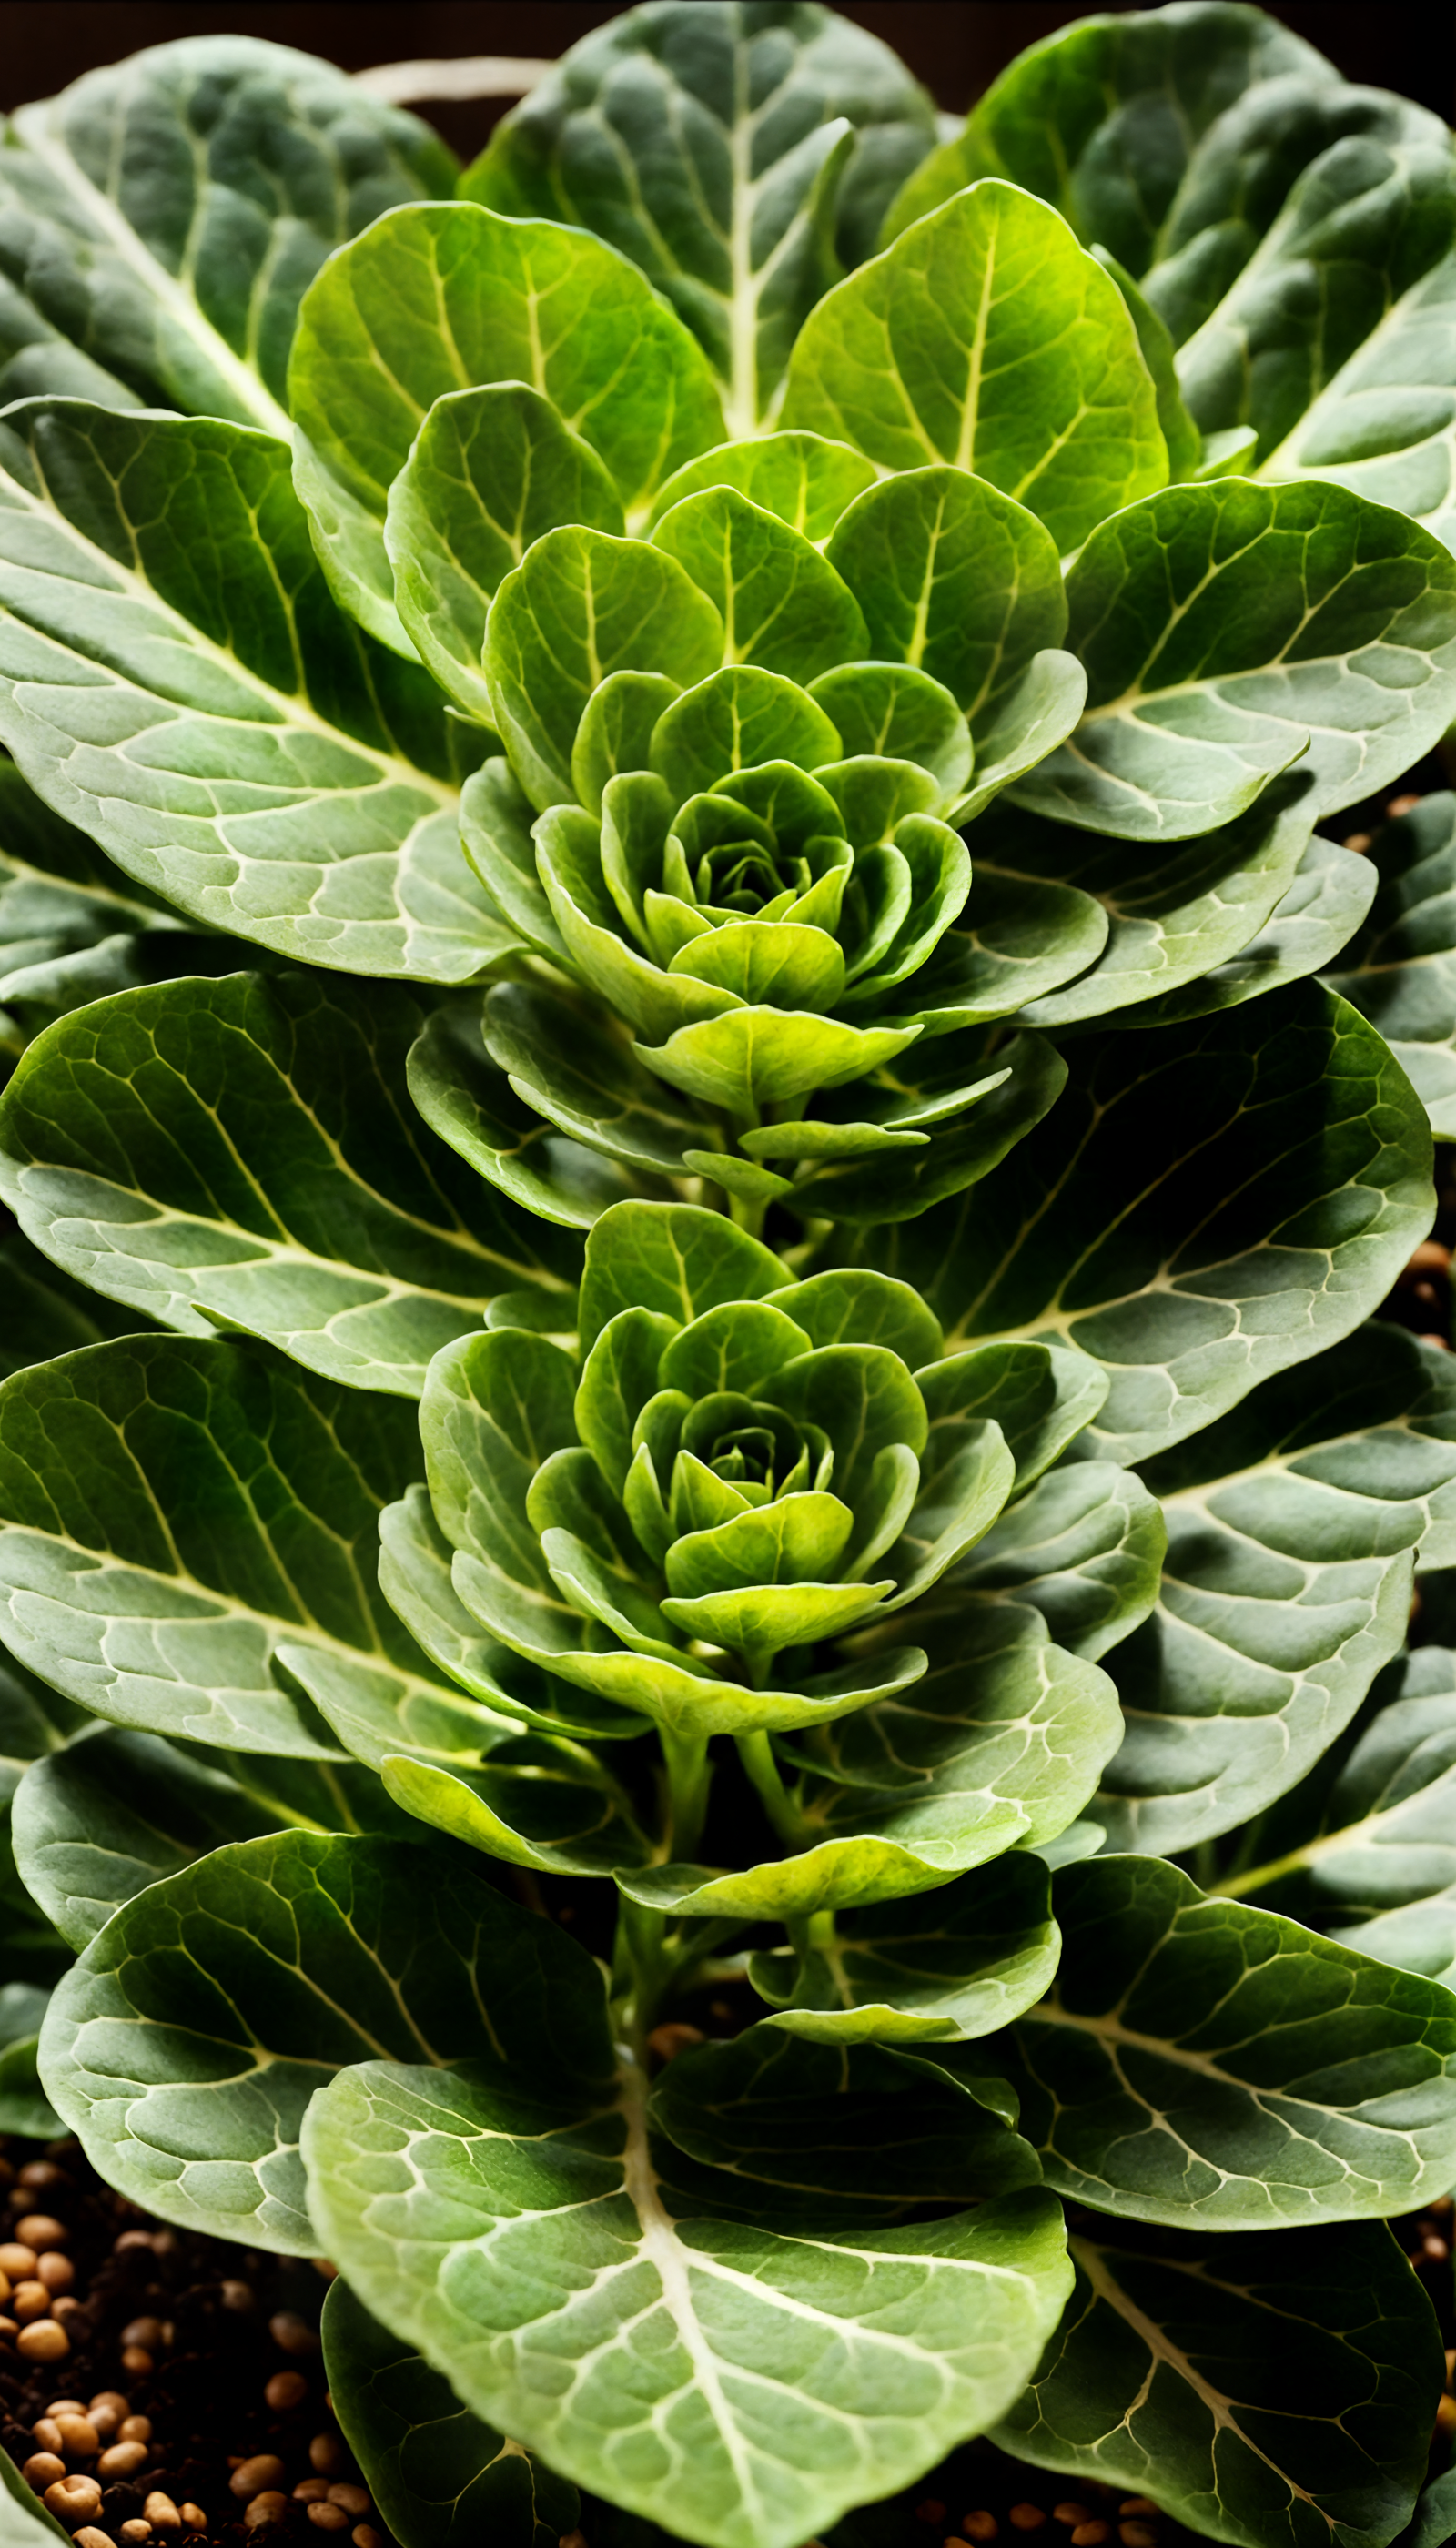 Hyper-realistic Brassica oleracea with lush leaves in a planter, against a dark background.